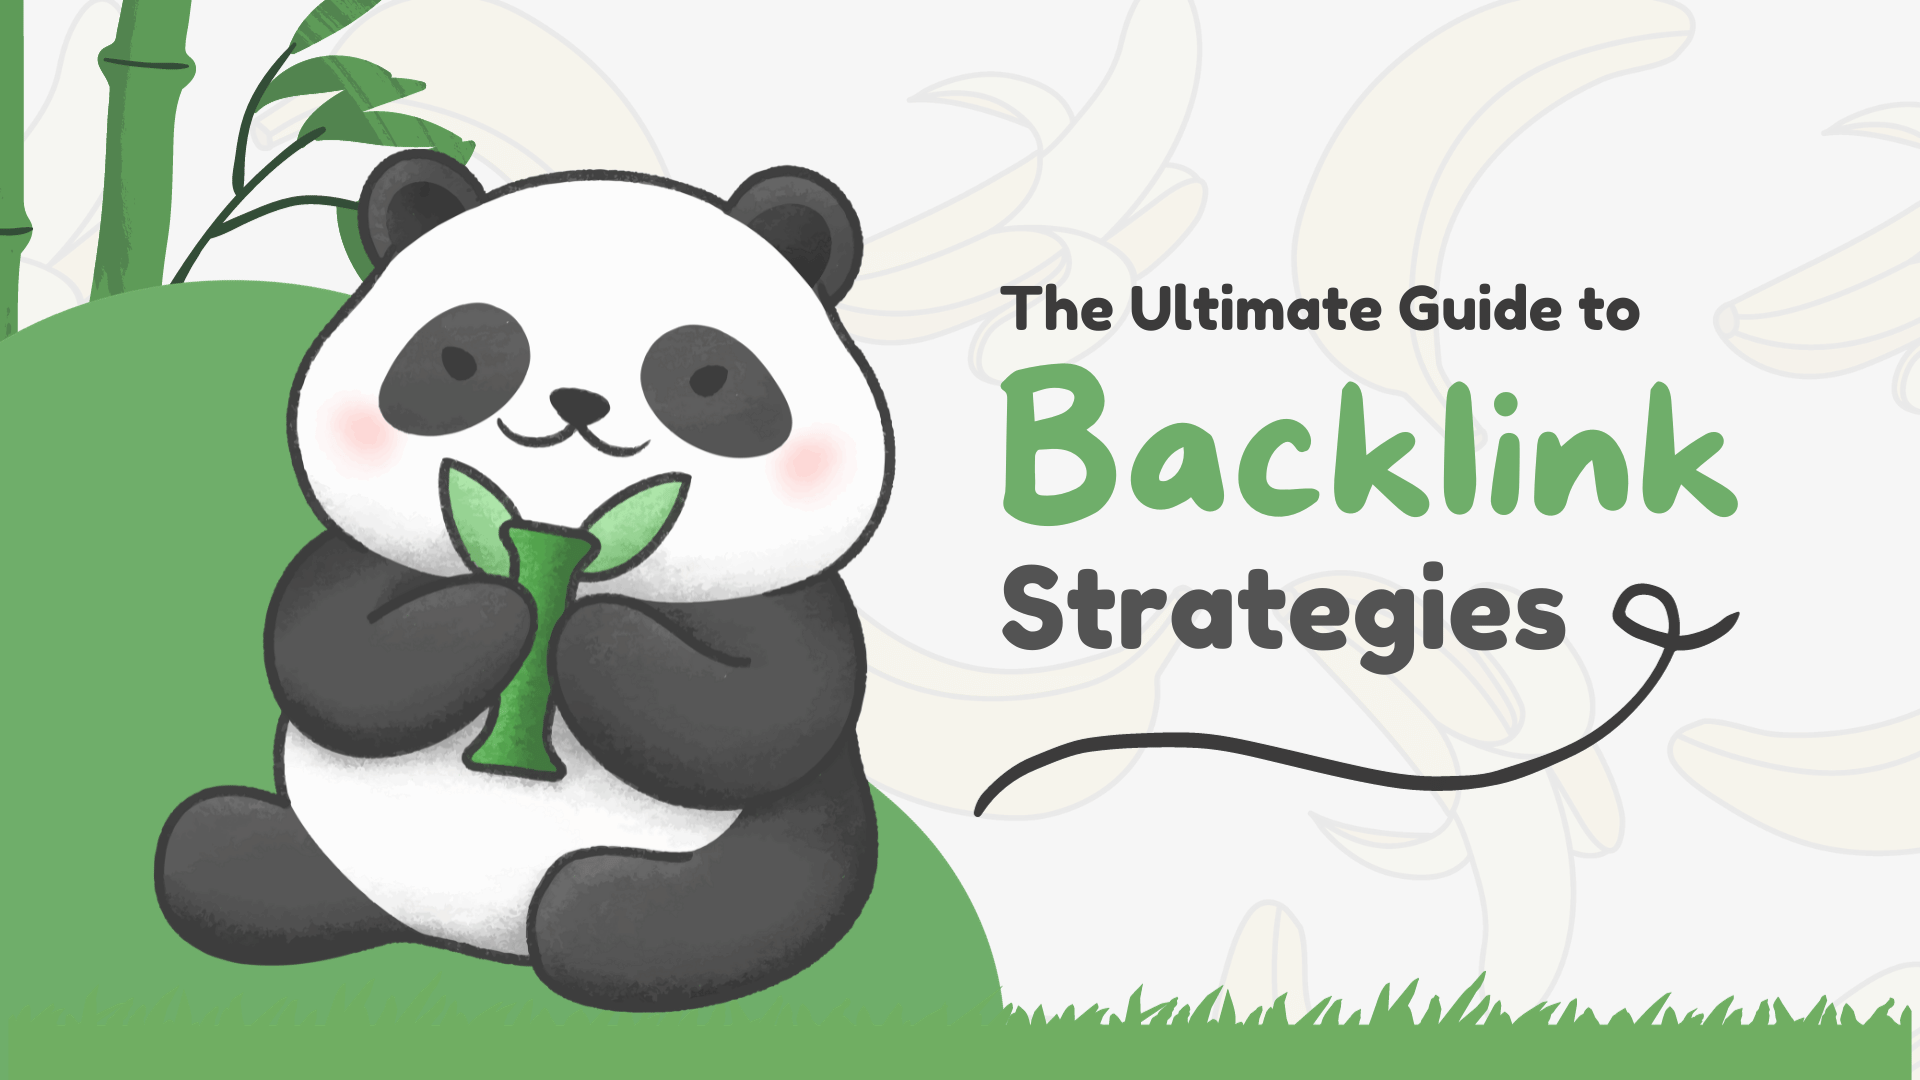 A panda holding a bamboo shoot illustrates the 'Ultimate Guide to Backlink Strategies,' symbolizing organic SEO growth and strength.